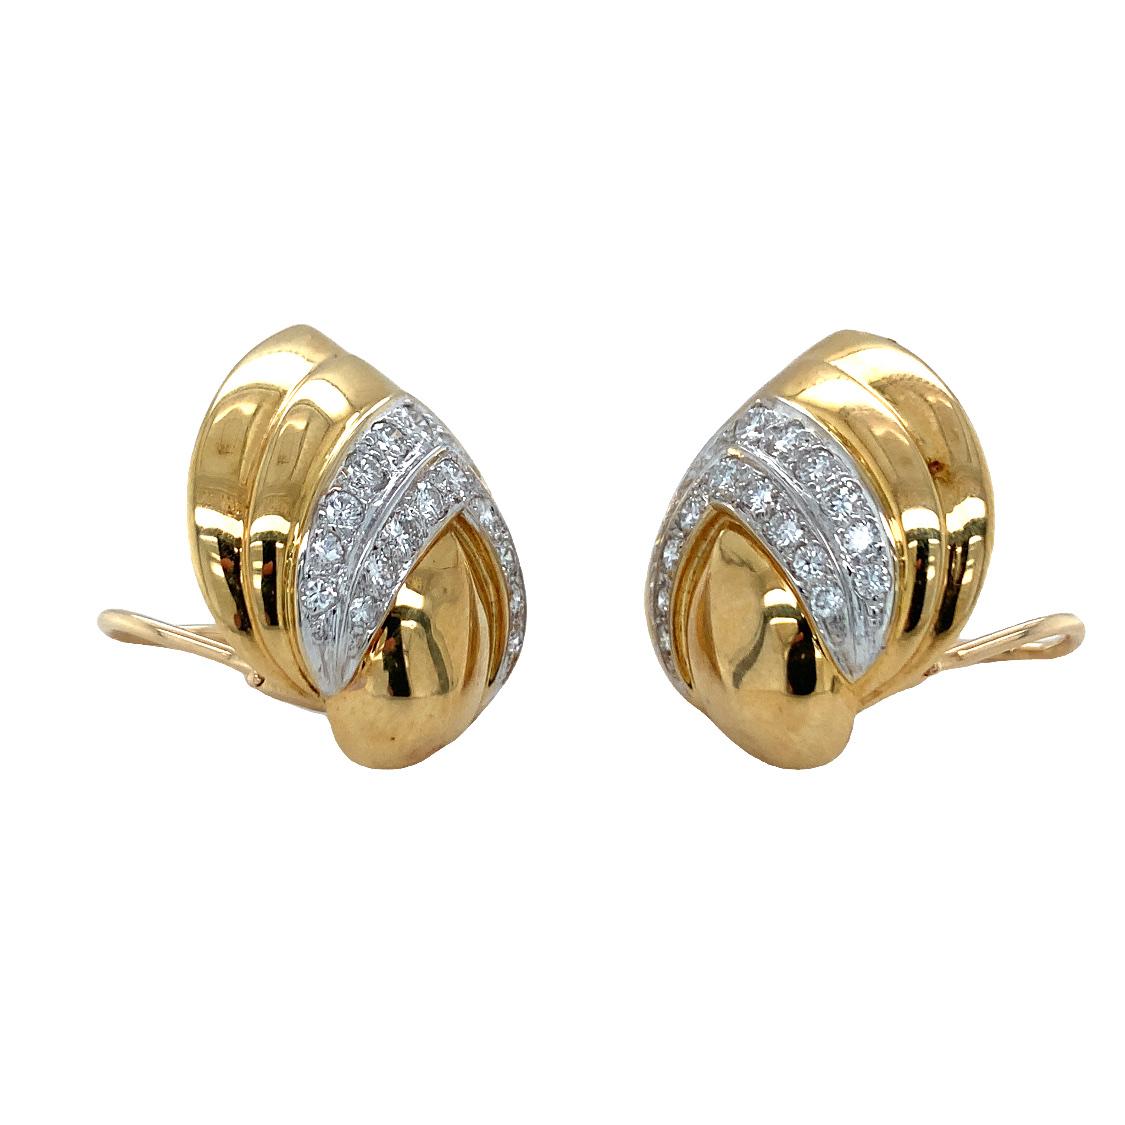 One pair of diamond 18K yellow gold earclips featuring 40 round brilliant cut diamonds totaling 1.35 ct. enhanced by a high polish finish. Circa 1970s.

Lovely, luxurious, statement.

Additional information:
Metal: 18K yellow gold
Gemstone: Diamonds